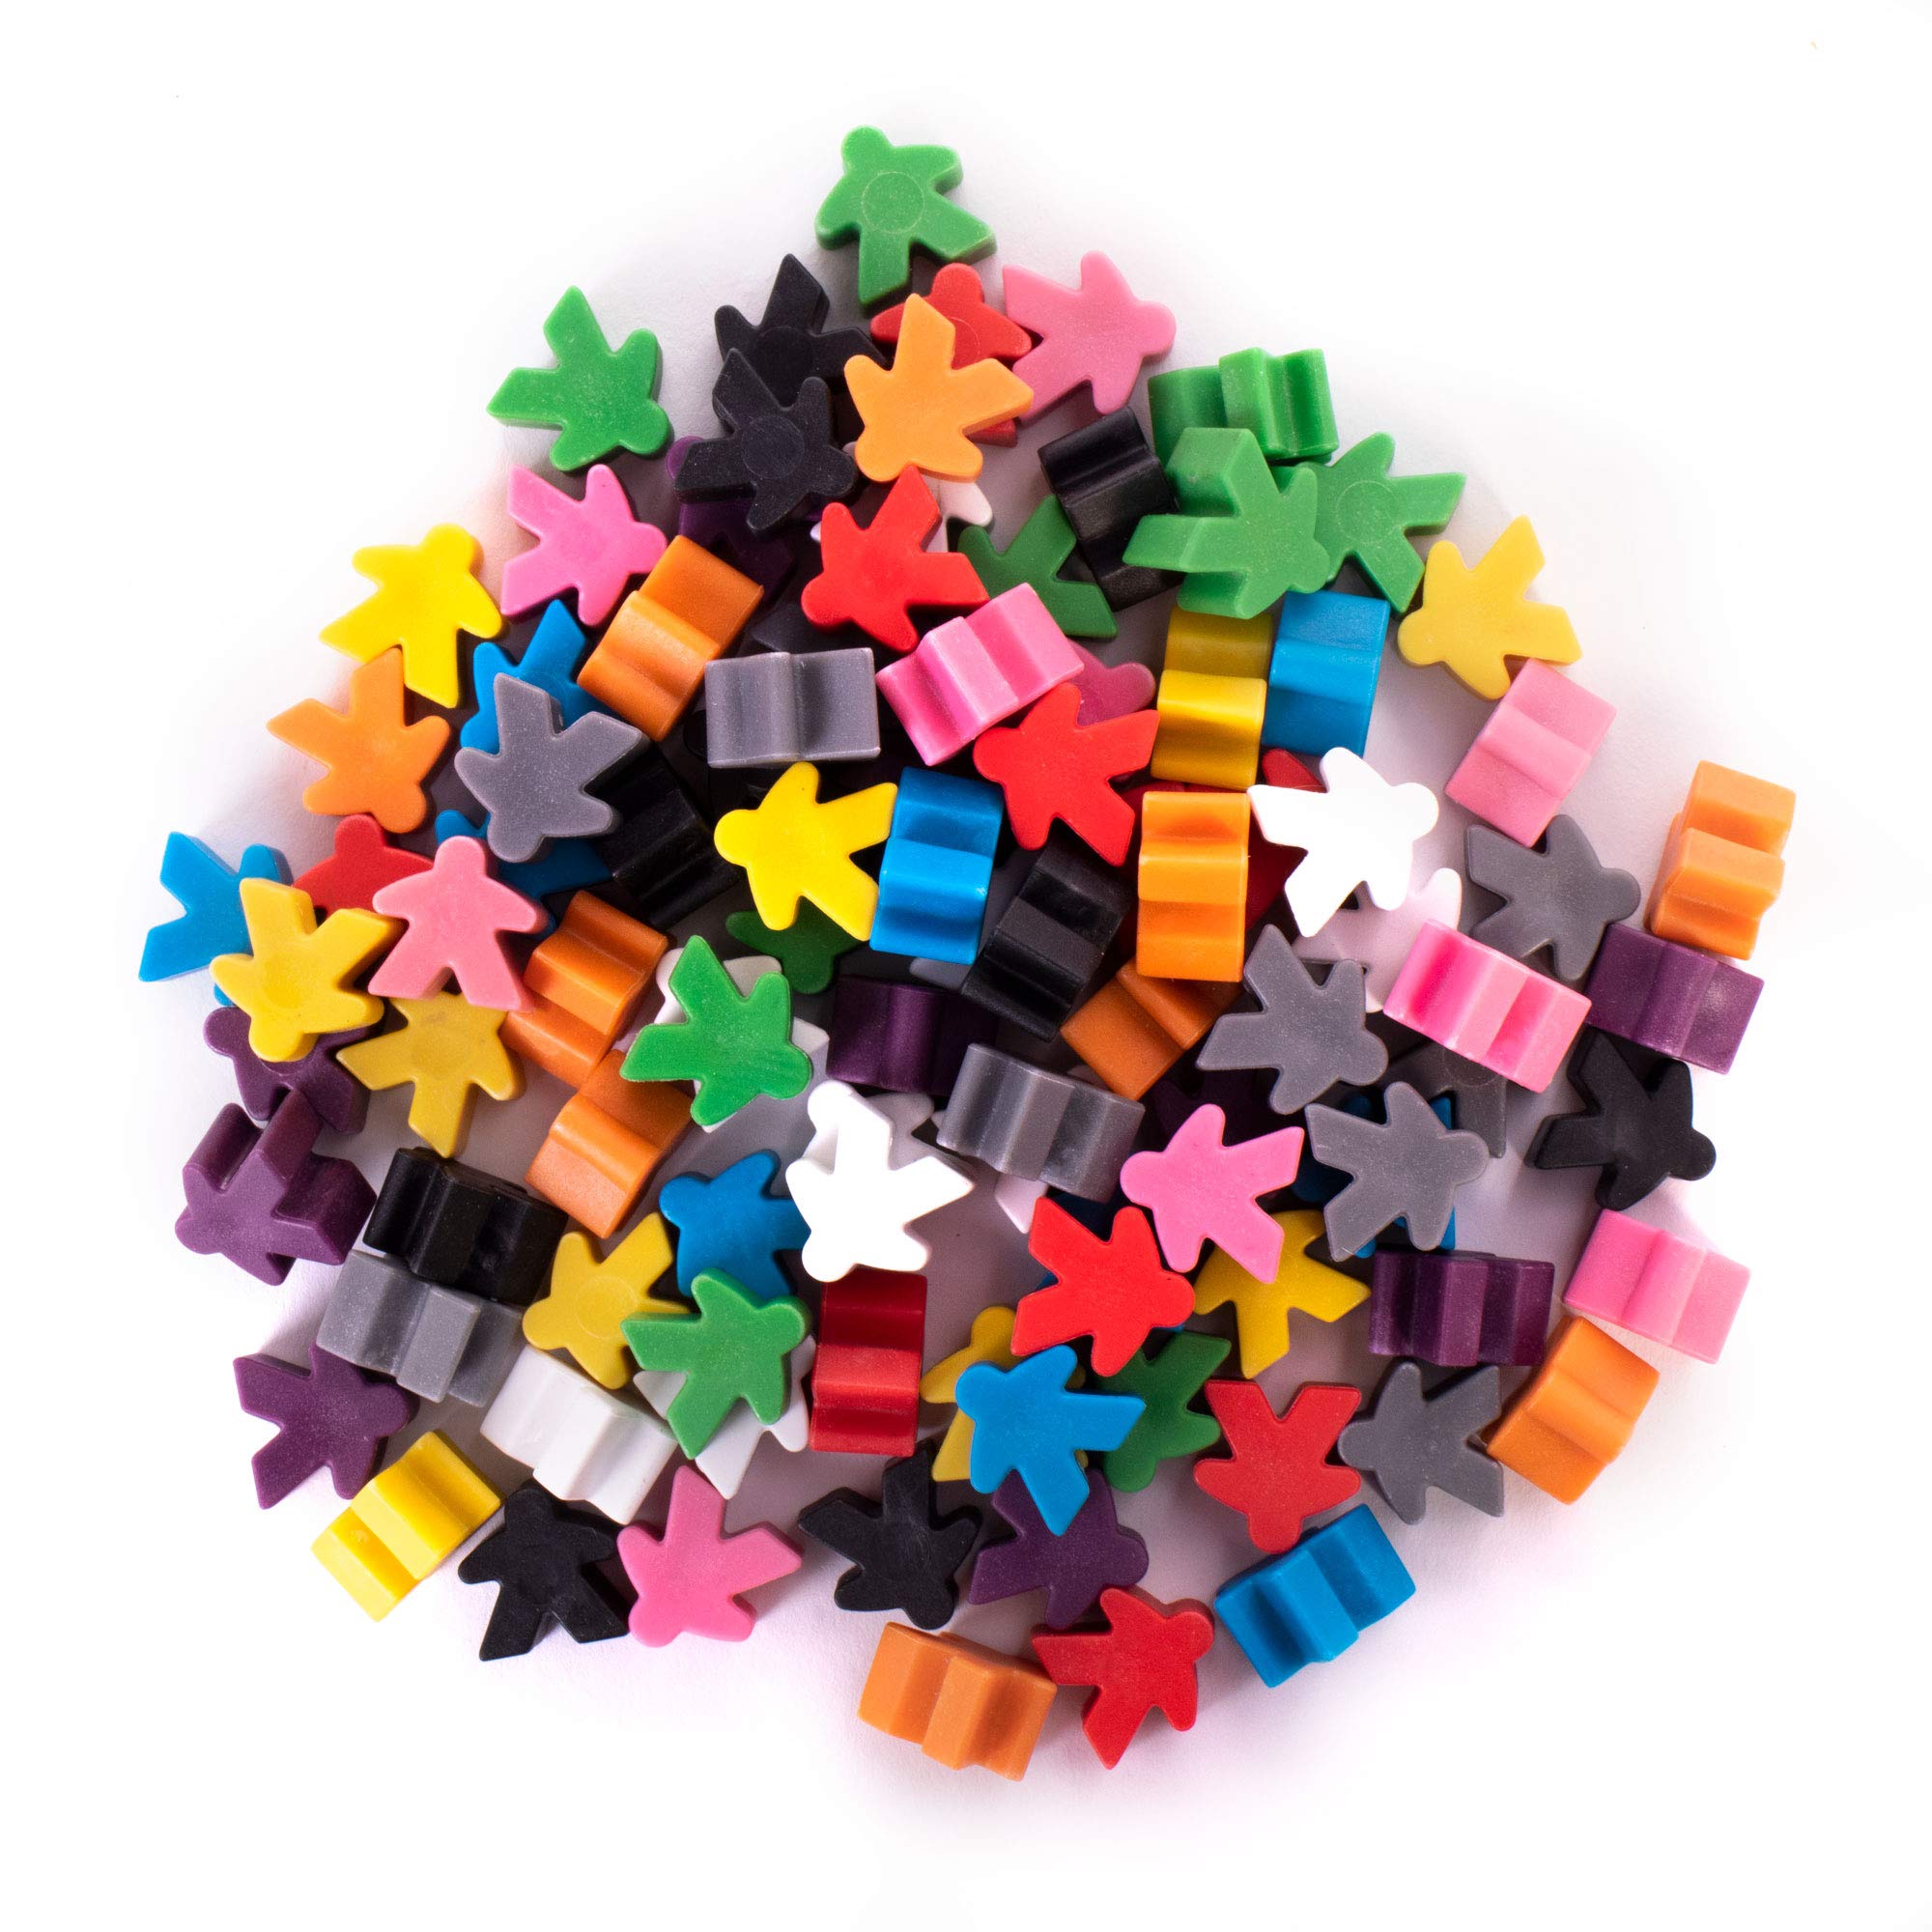 Plastic Meeples Board Game Pawns (100-pack) - 10 Color Assortment